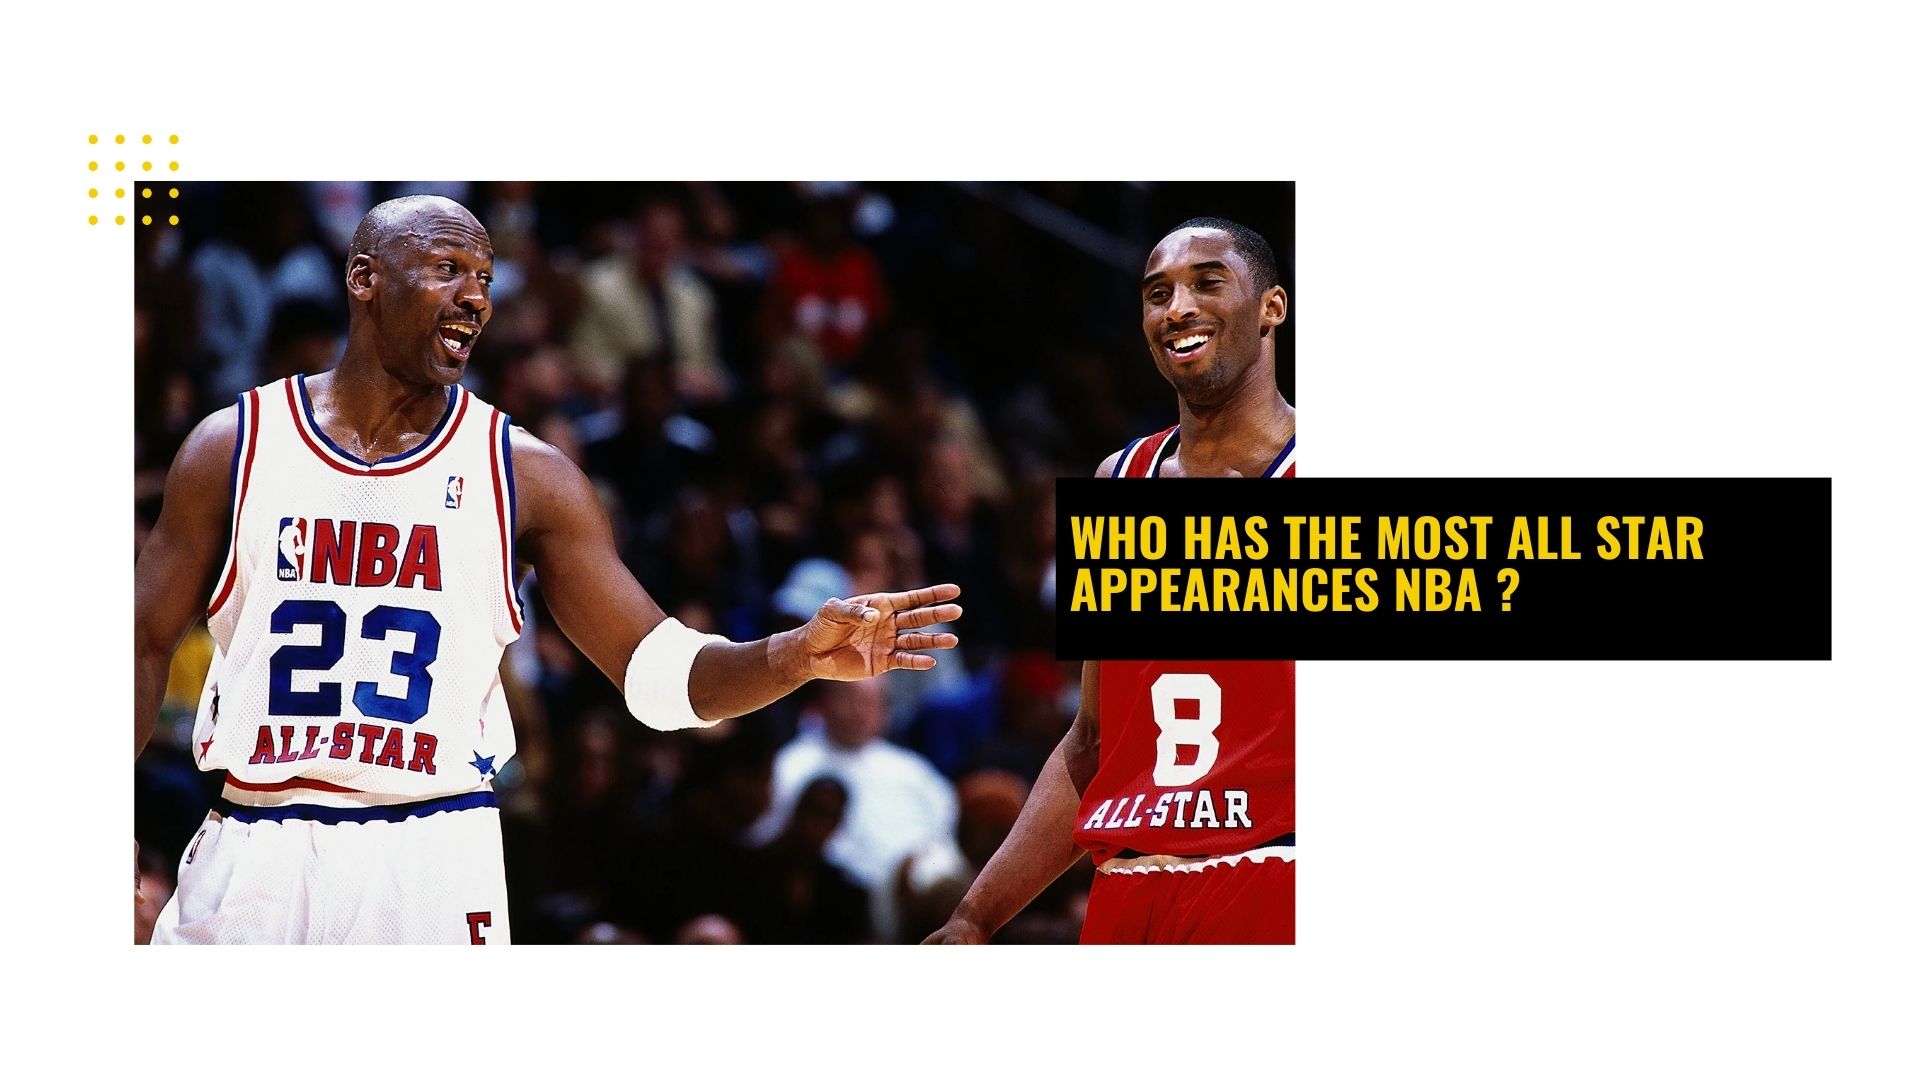 Who has the most all star appearances NBA 